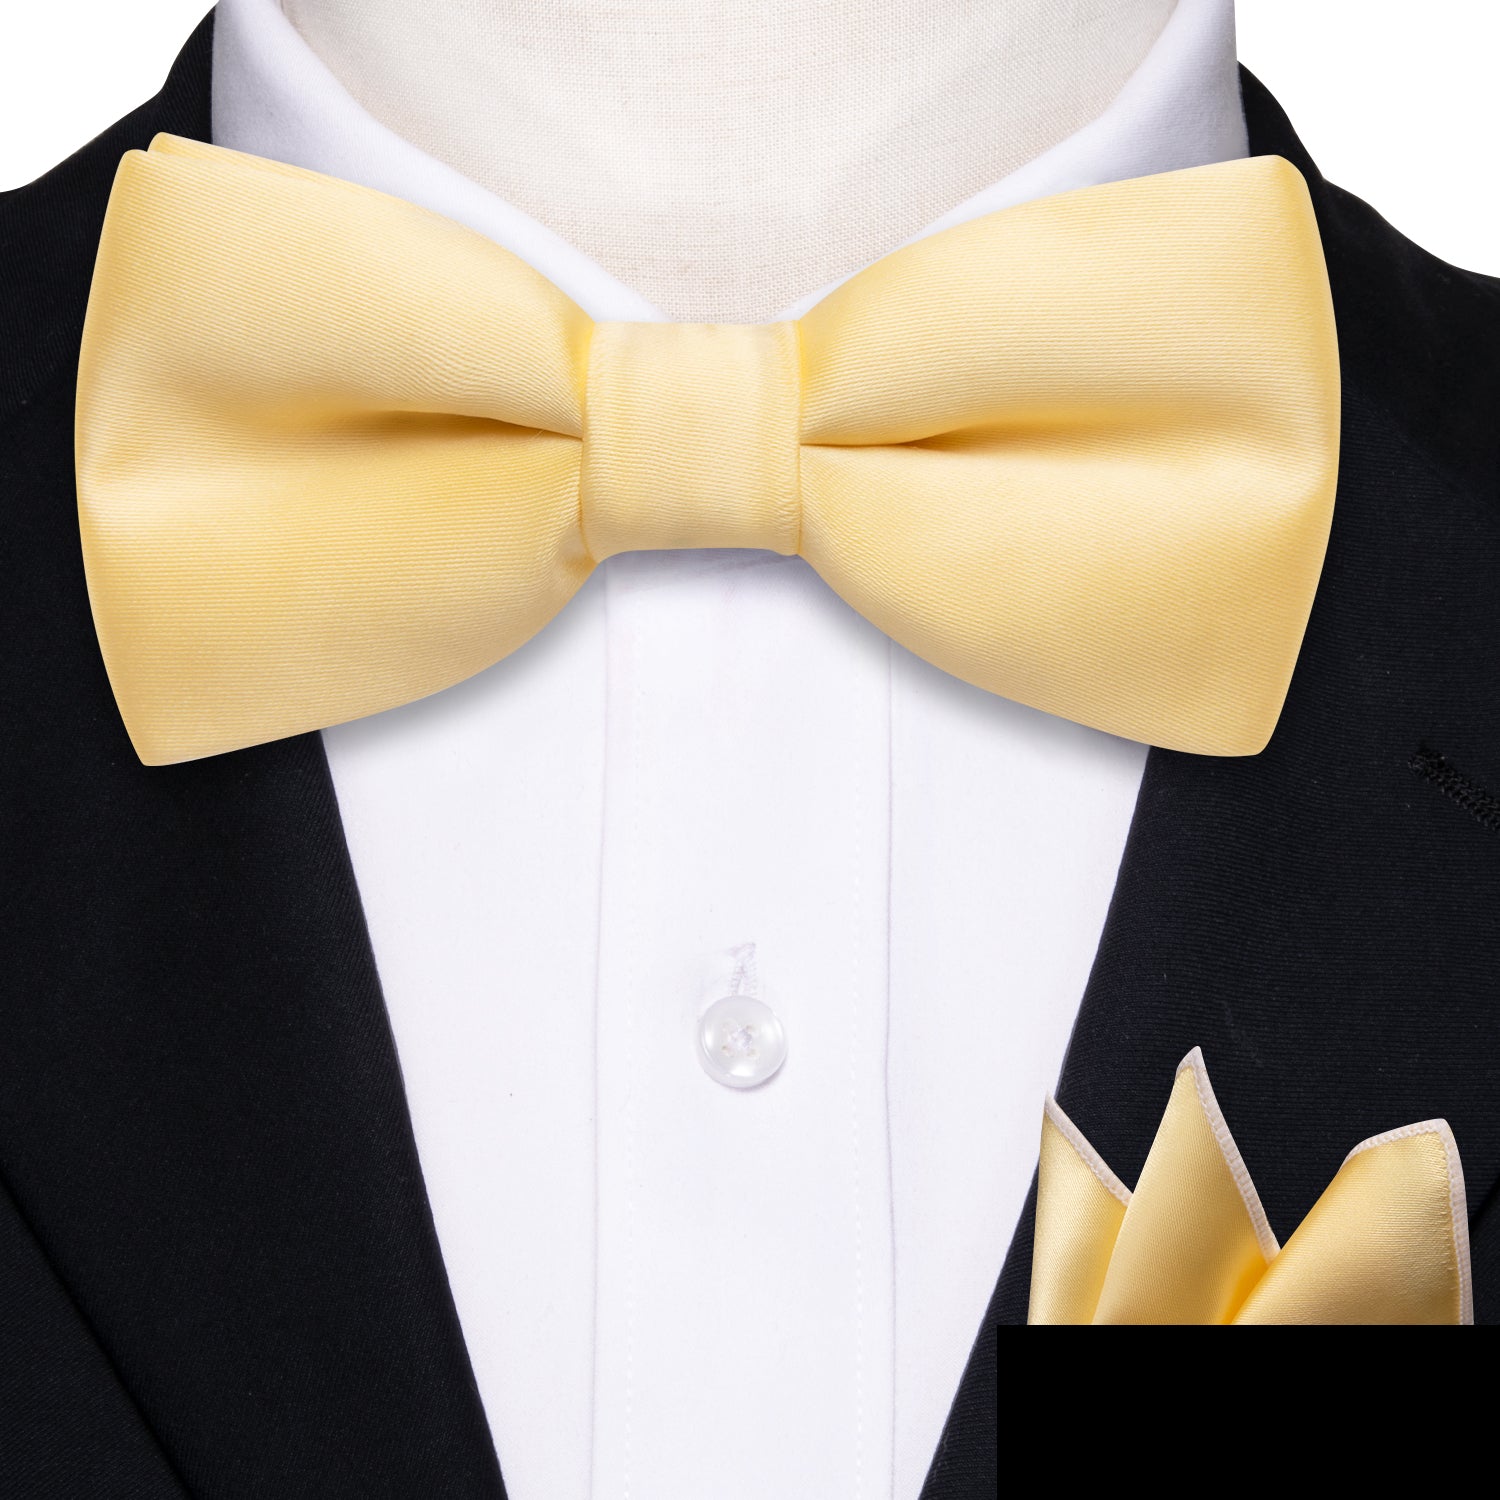 Barry.wang Kids Tie Yellow Gold Solid Bow Tie Pocket Square Set